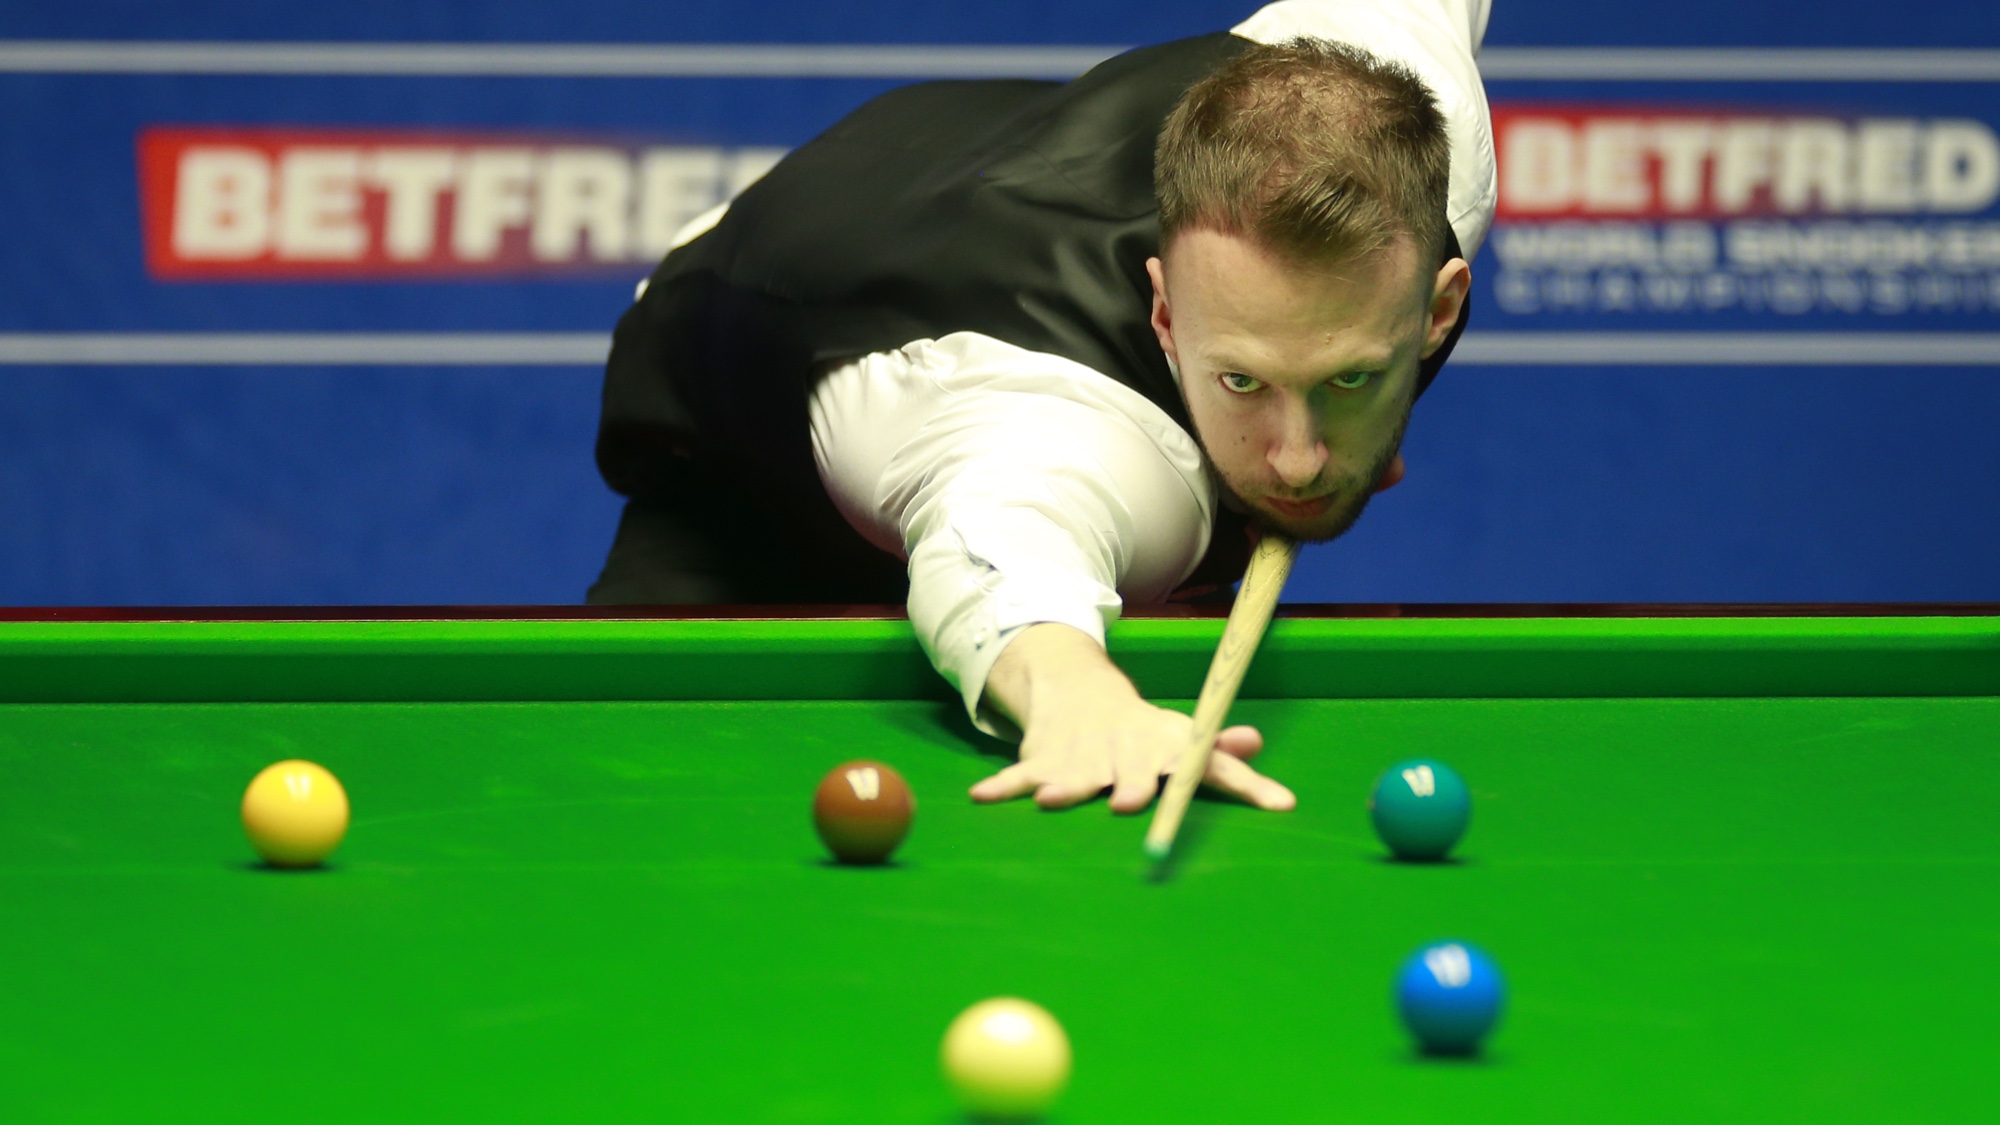 Snooker live stream How to watch 2020 World Snooker Championship